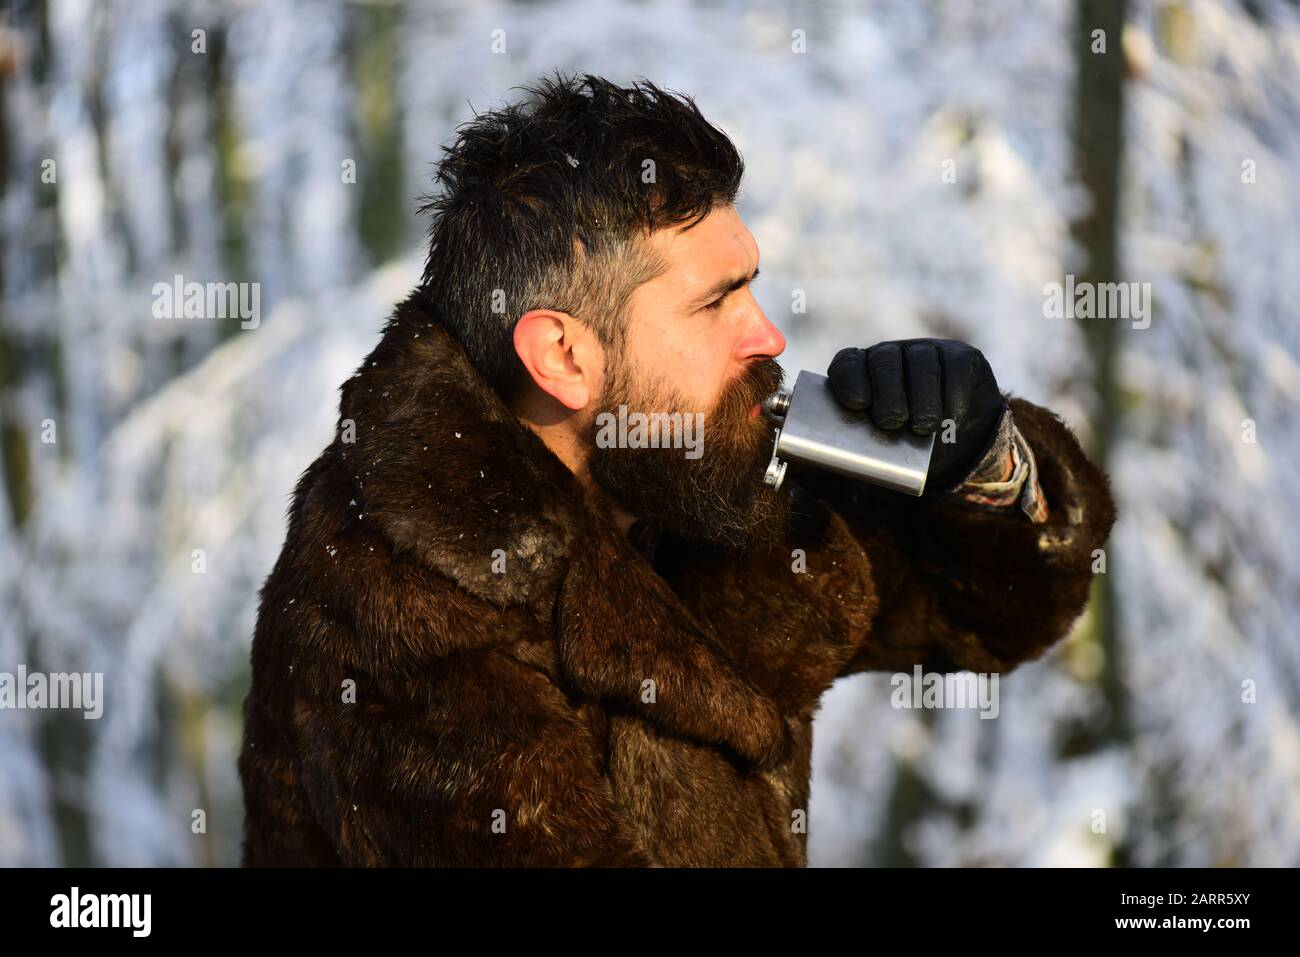 Macho with beard and mustache in forest. Man in fur coat drinks from metal flask. Warming drinks concept. Guy on snowy nature park background, defocused. Stock Photo